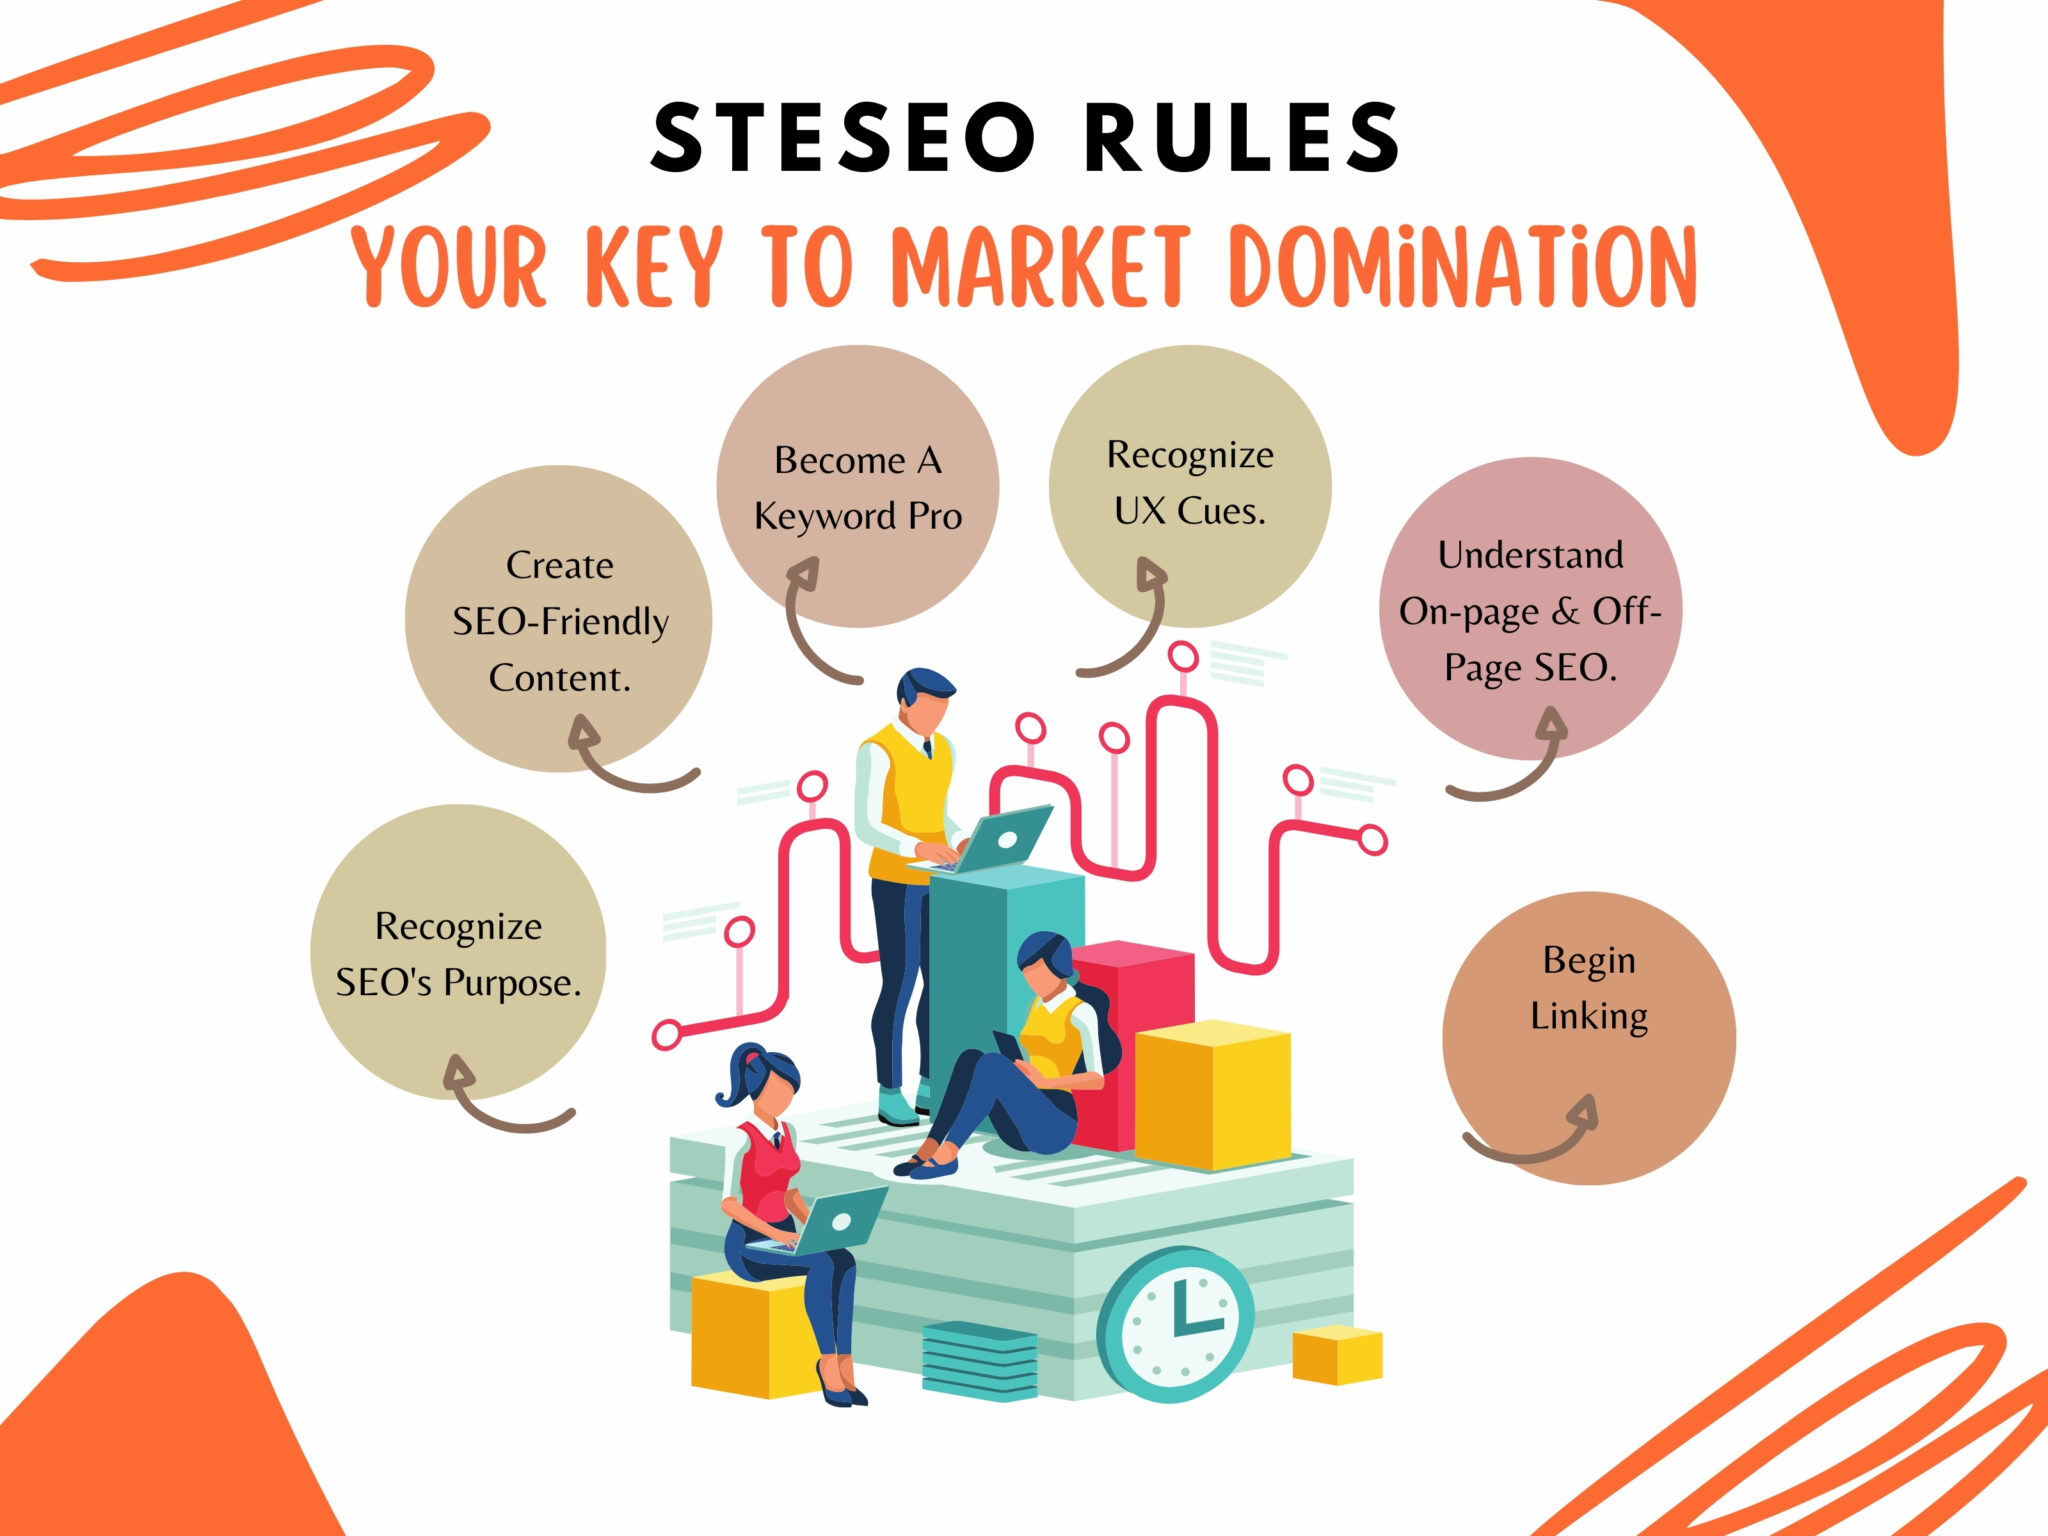 SEO RULES TO DOMINATE YOUR MARKET